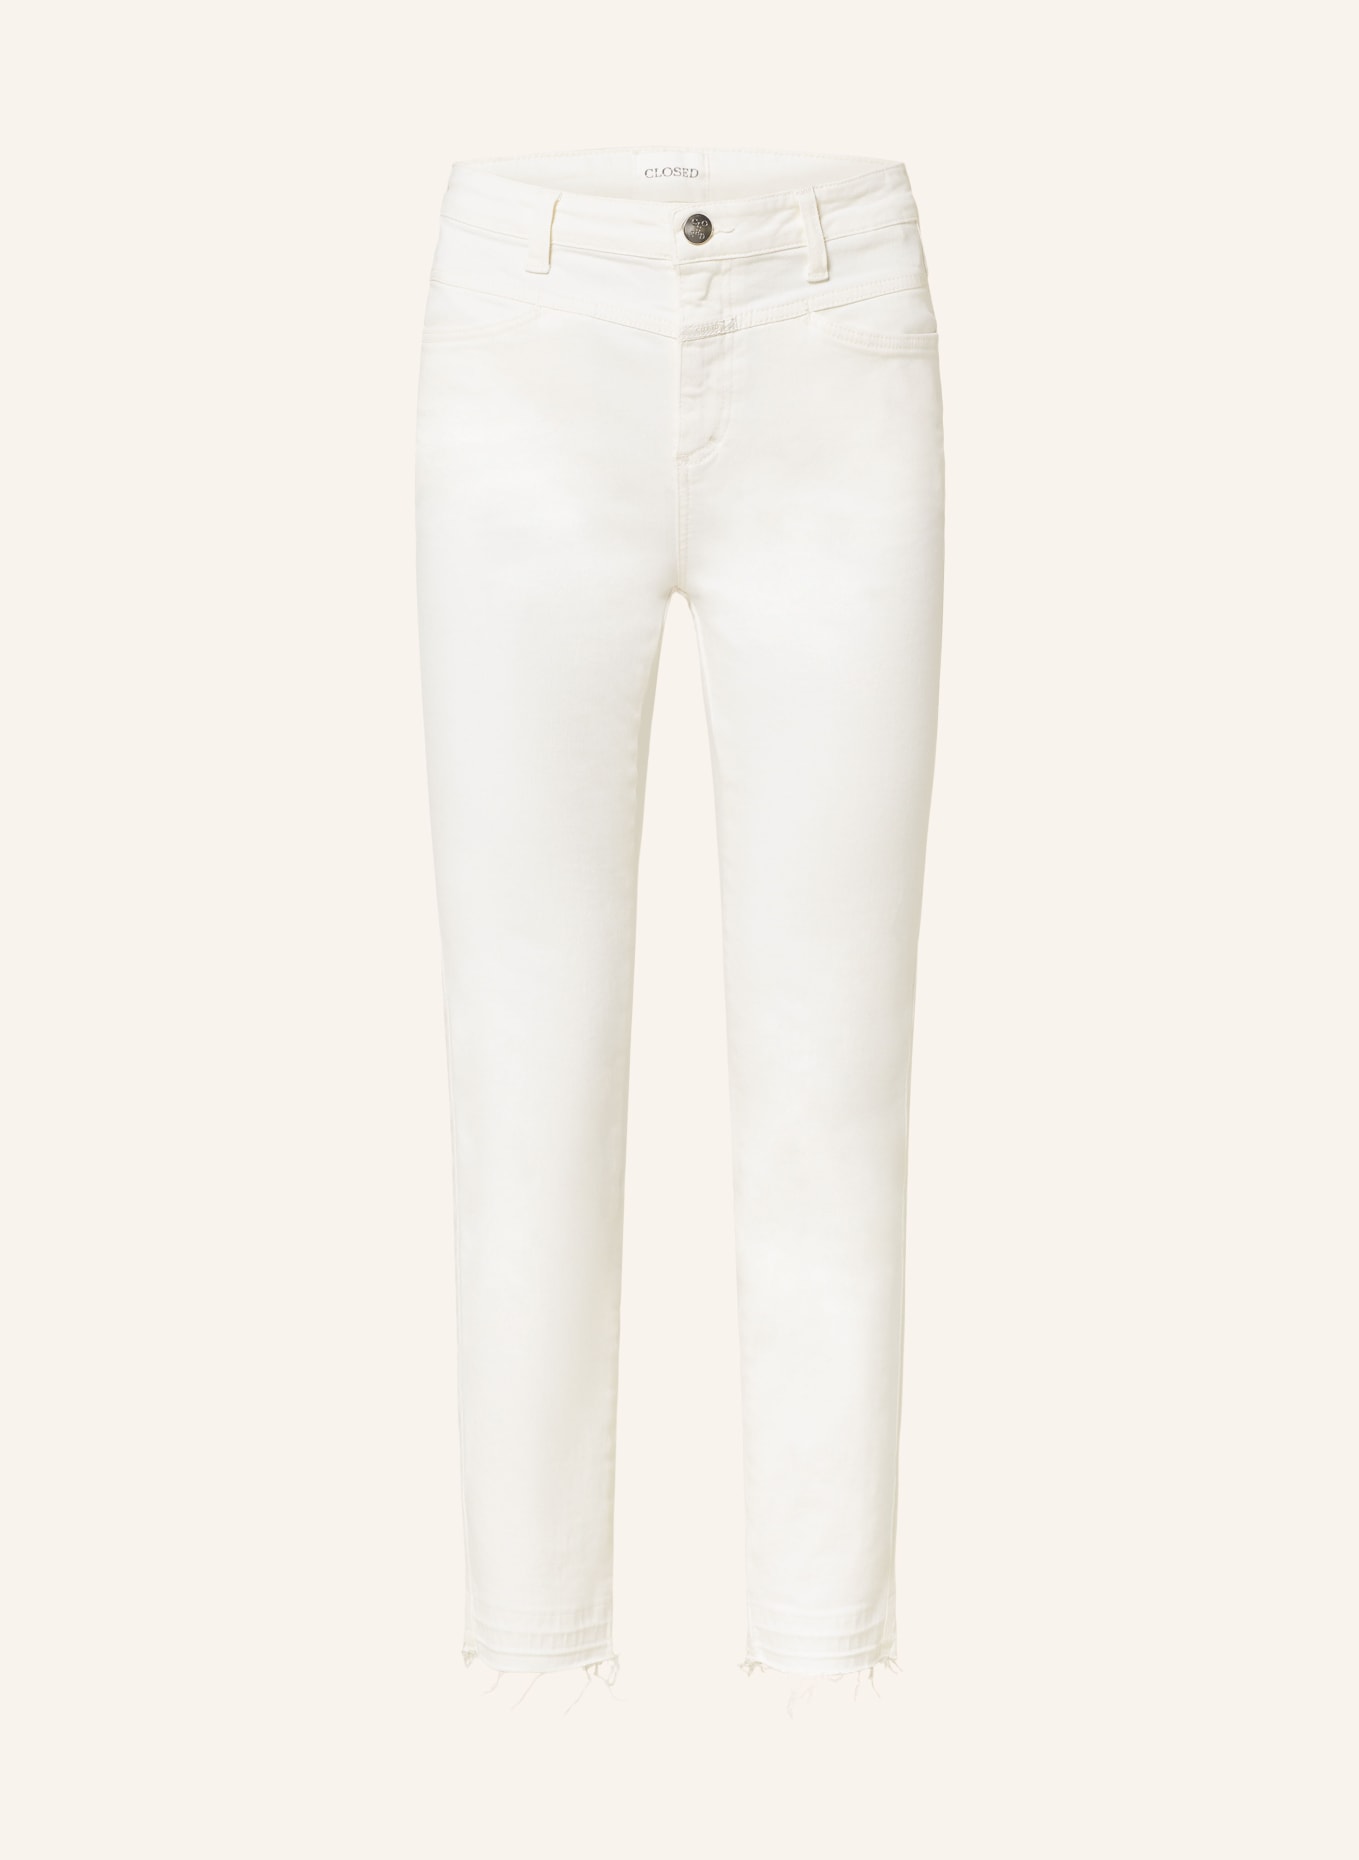 CLOSED Skinny jeans, Color: 218 IVORY (Image 1)